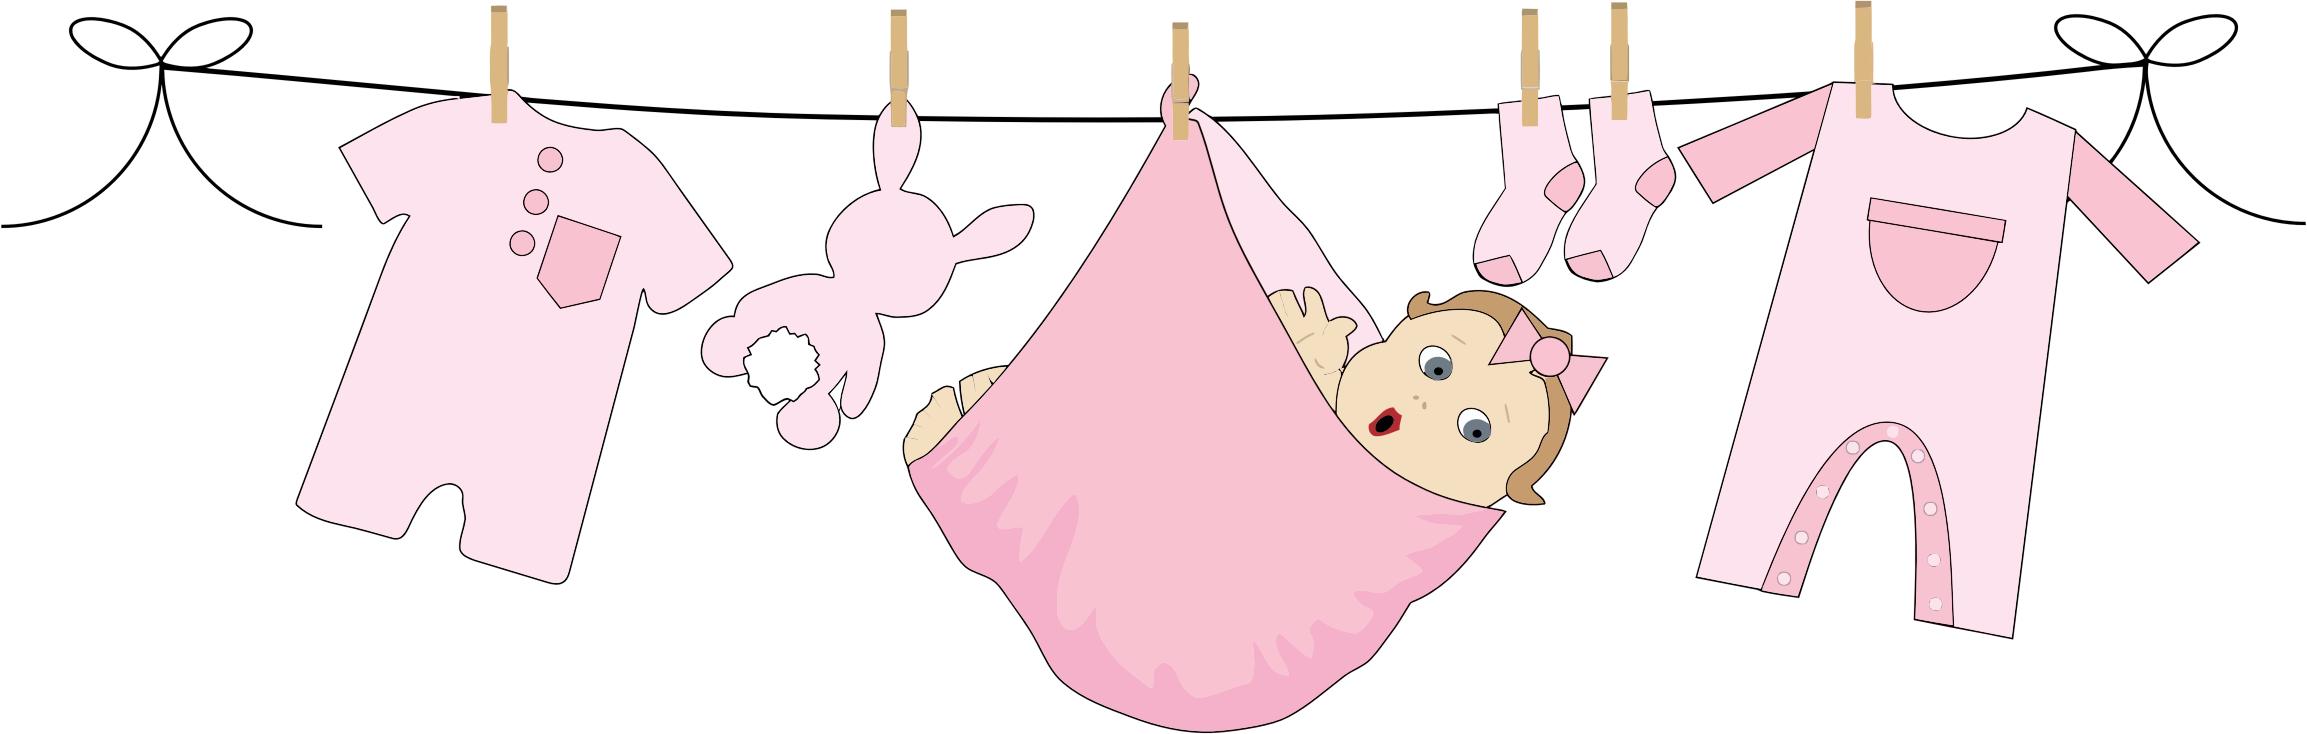 Baby Girl Hanging On Clothesline png icons